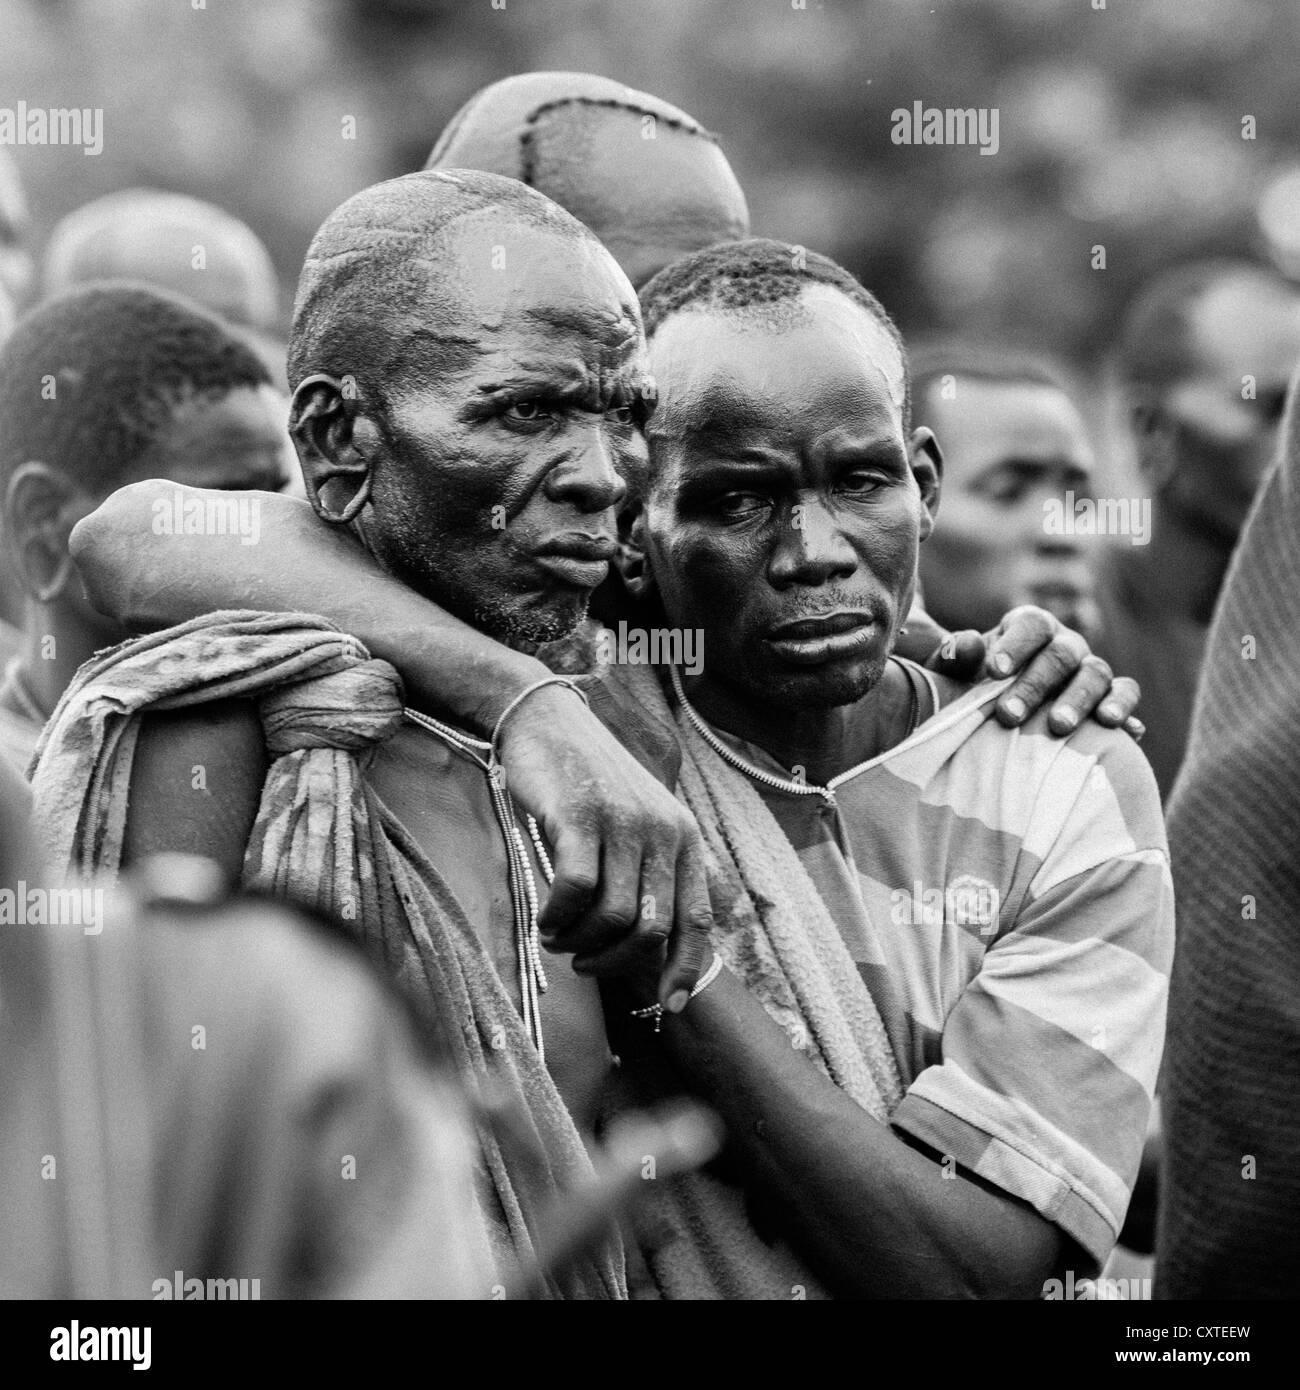 Suri Tribe Men Holding Eachother At A Ceremony Organized By The Government, Kibish, Omo Valley, Ethiopia Stock Photo